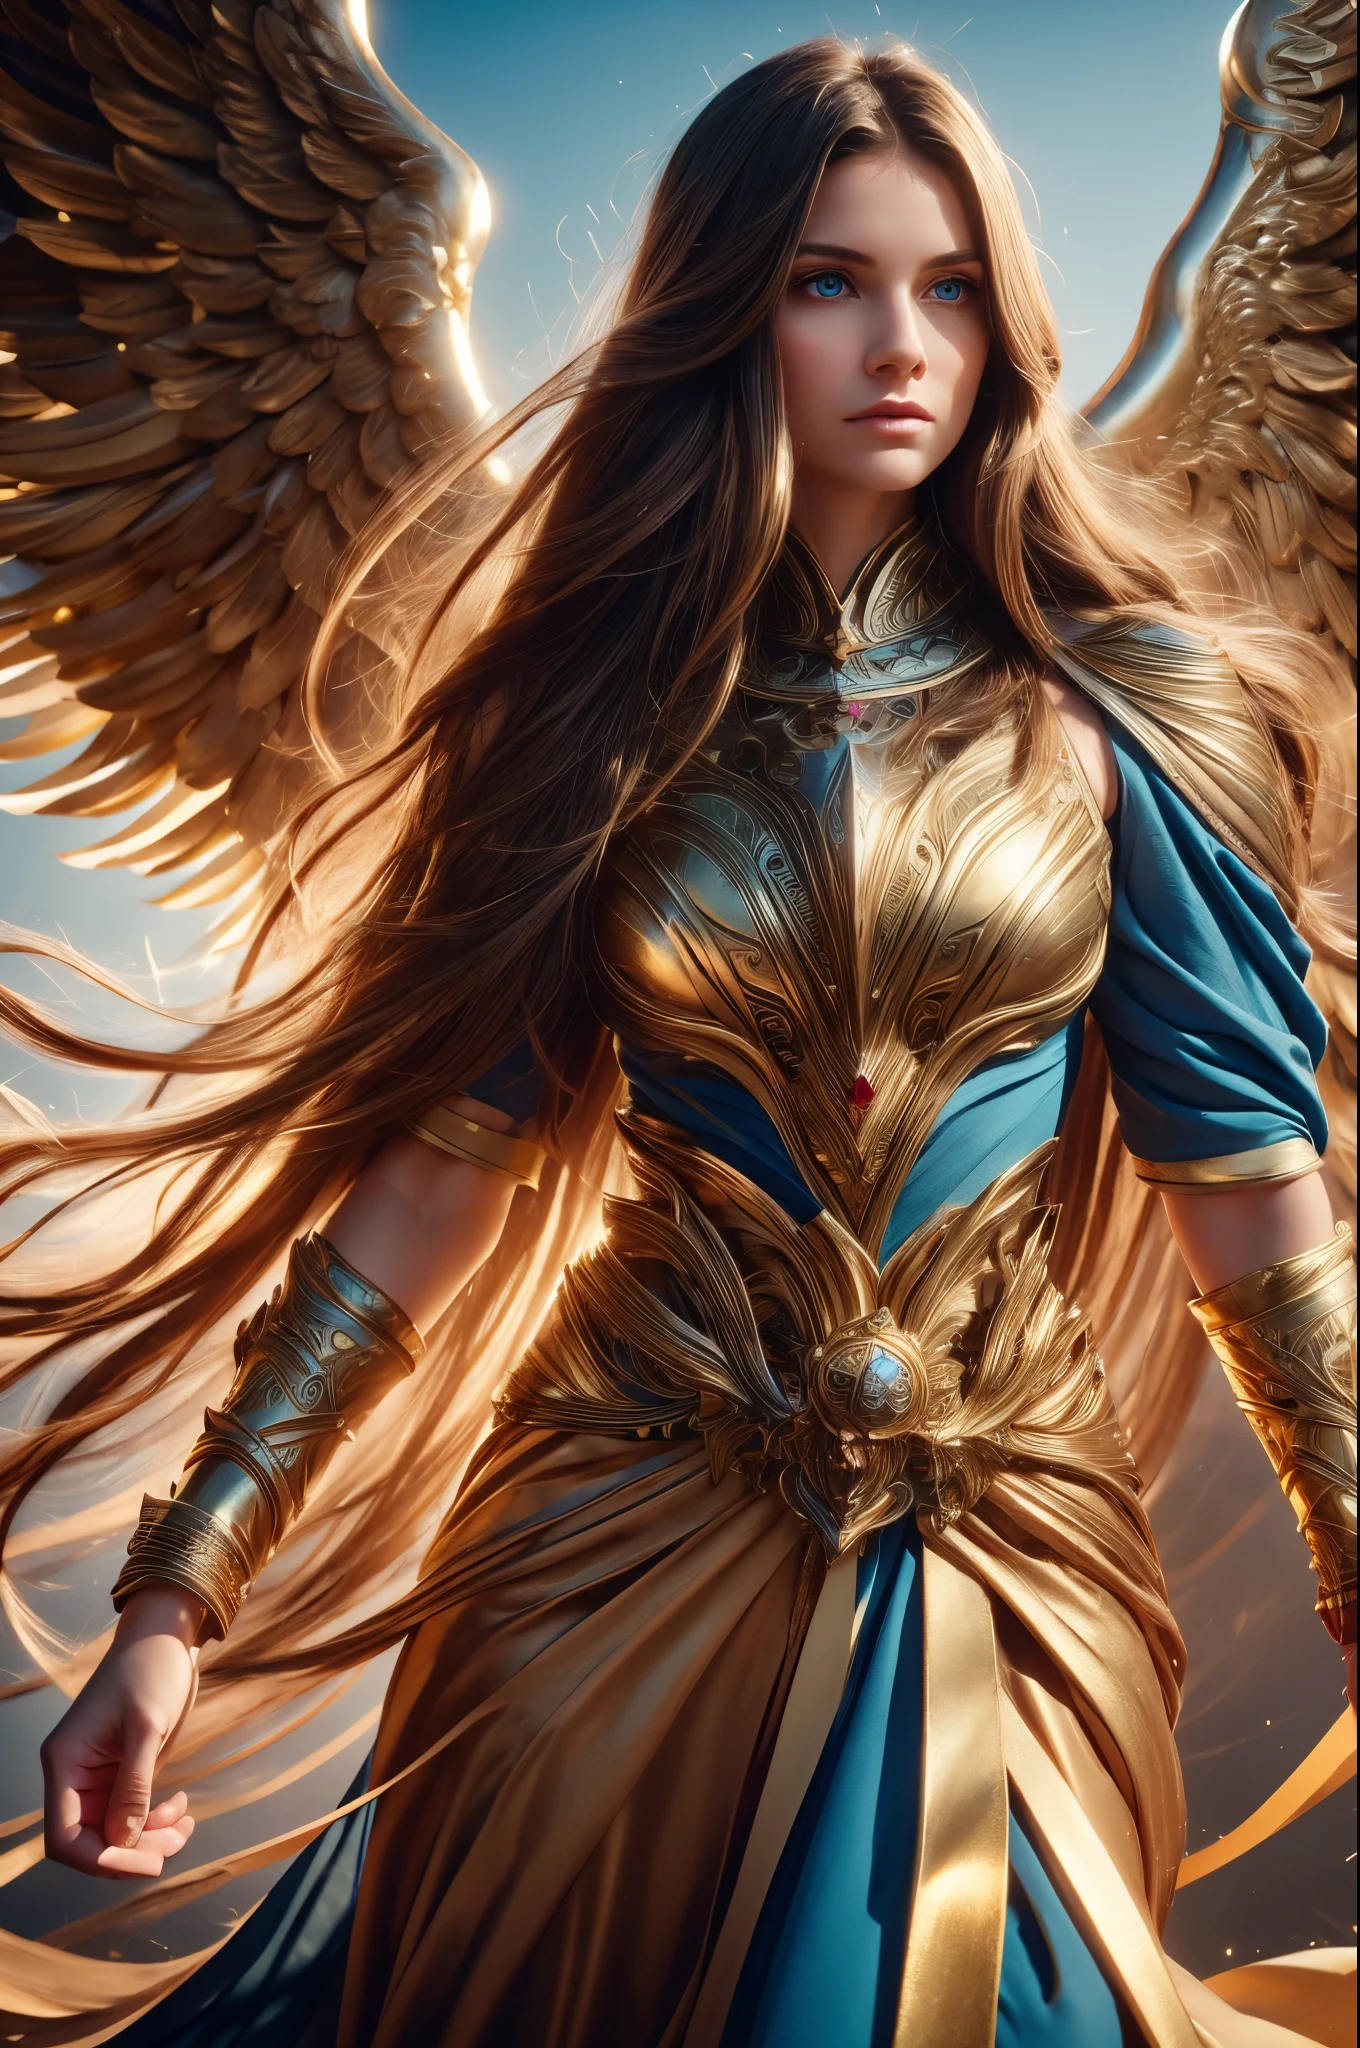 WINGED WOMAN, SAINT WOMAN, HUGE LONG HAIR, BROWN HAIR, HUGE BROWN FEATHERS, LONG BLUE DRESS, PALE SKIN, BLUE EYES, LIGHTING EYES, ROSY CHEEKS, MENTAL FORAMEN, ATHLETIC BODY, MUSCLES, LIGHTING AURA, GOLD BRACELETS, GOLD GAUNTLETS, BACKLIGHTS, SUN, RIVER, SAINT WOMAN, FRONT BODY VIEW, ANGEL FROM HEAVEN